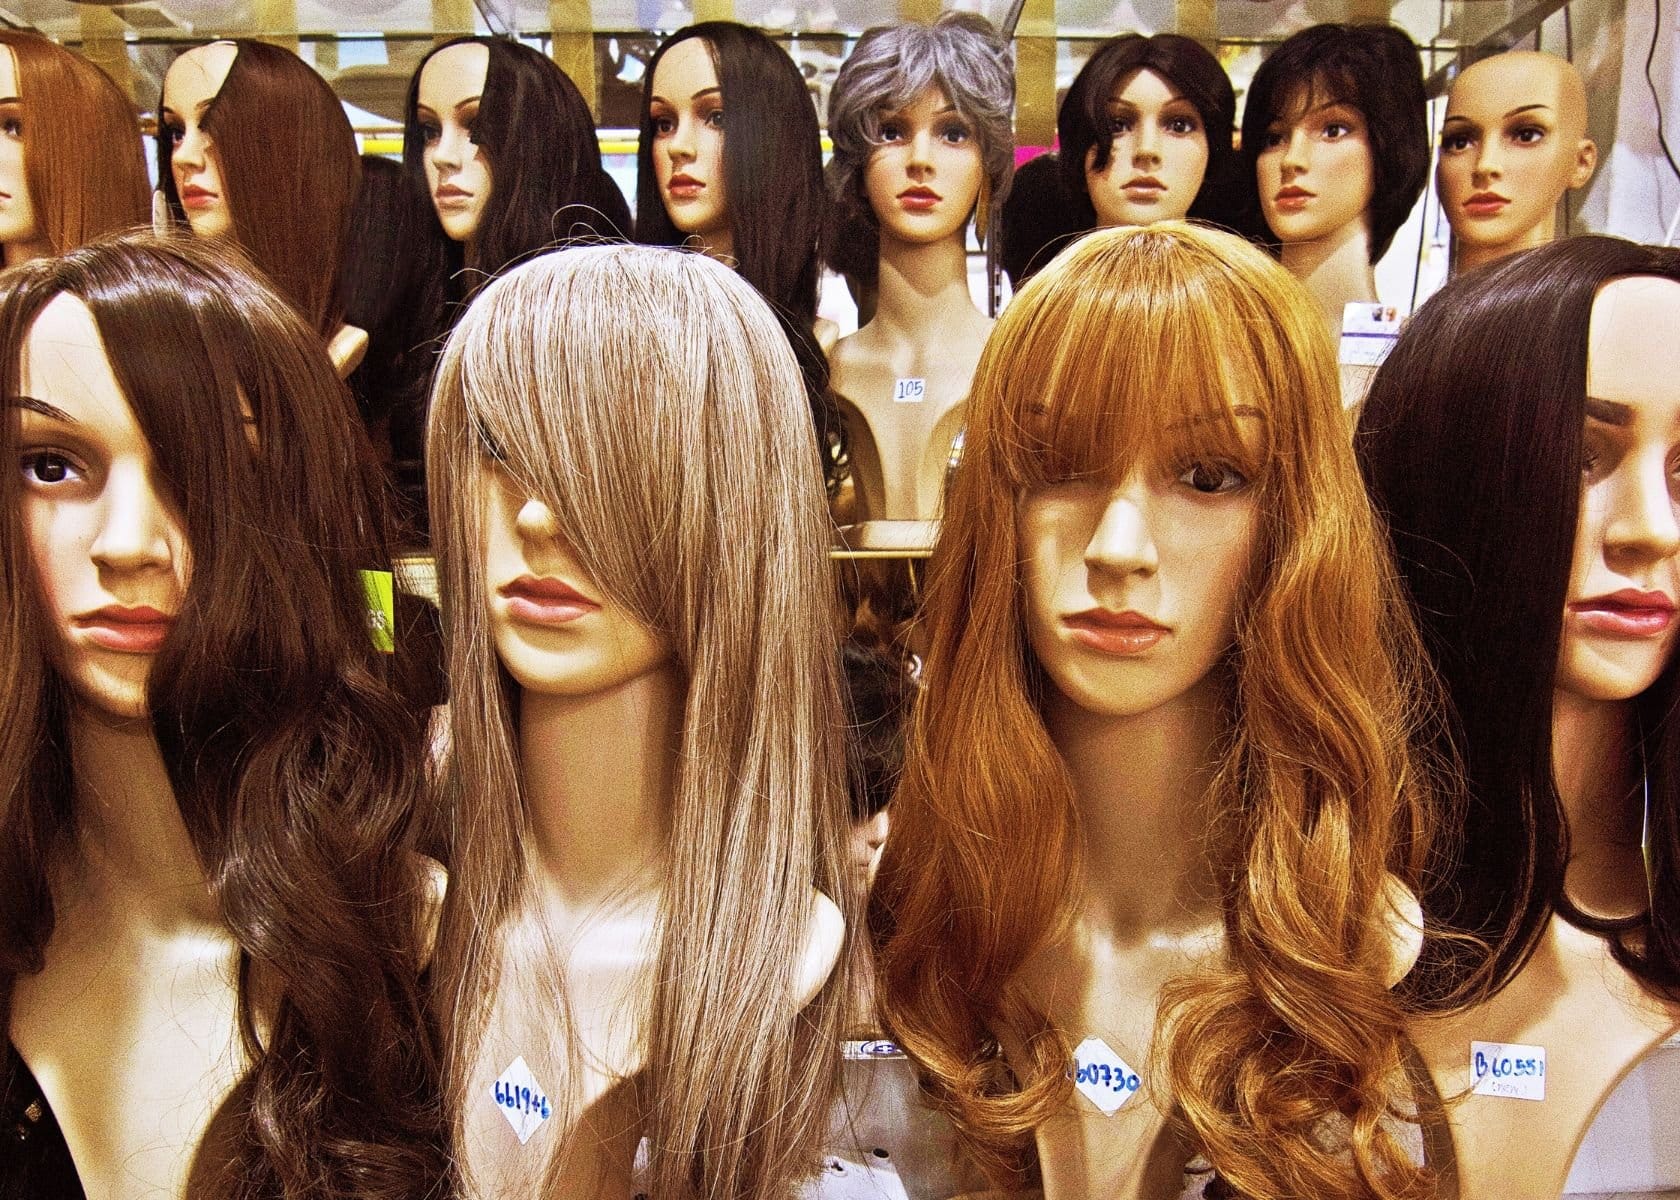 What Are Wigs Made Of?